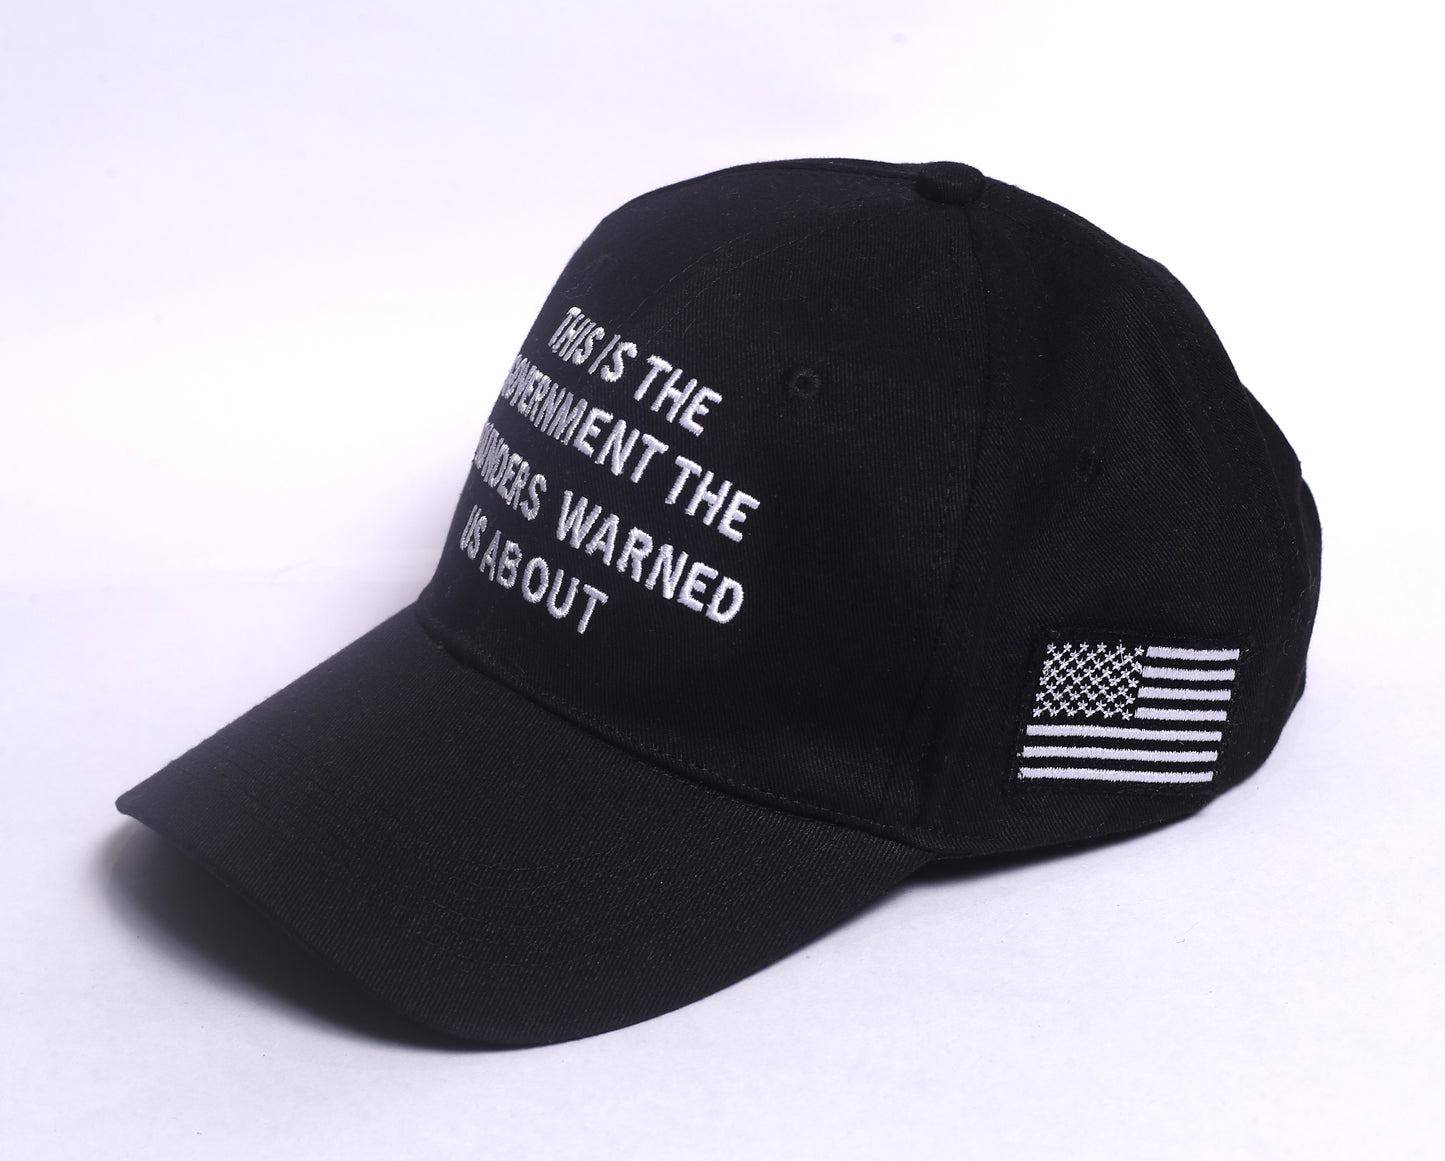 This Is The Government Authentic Cotton Black Hat